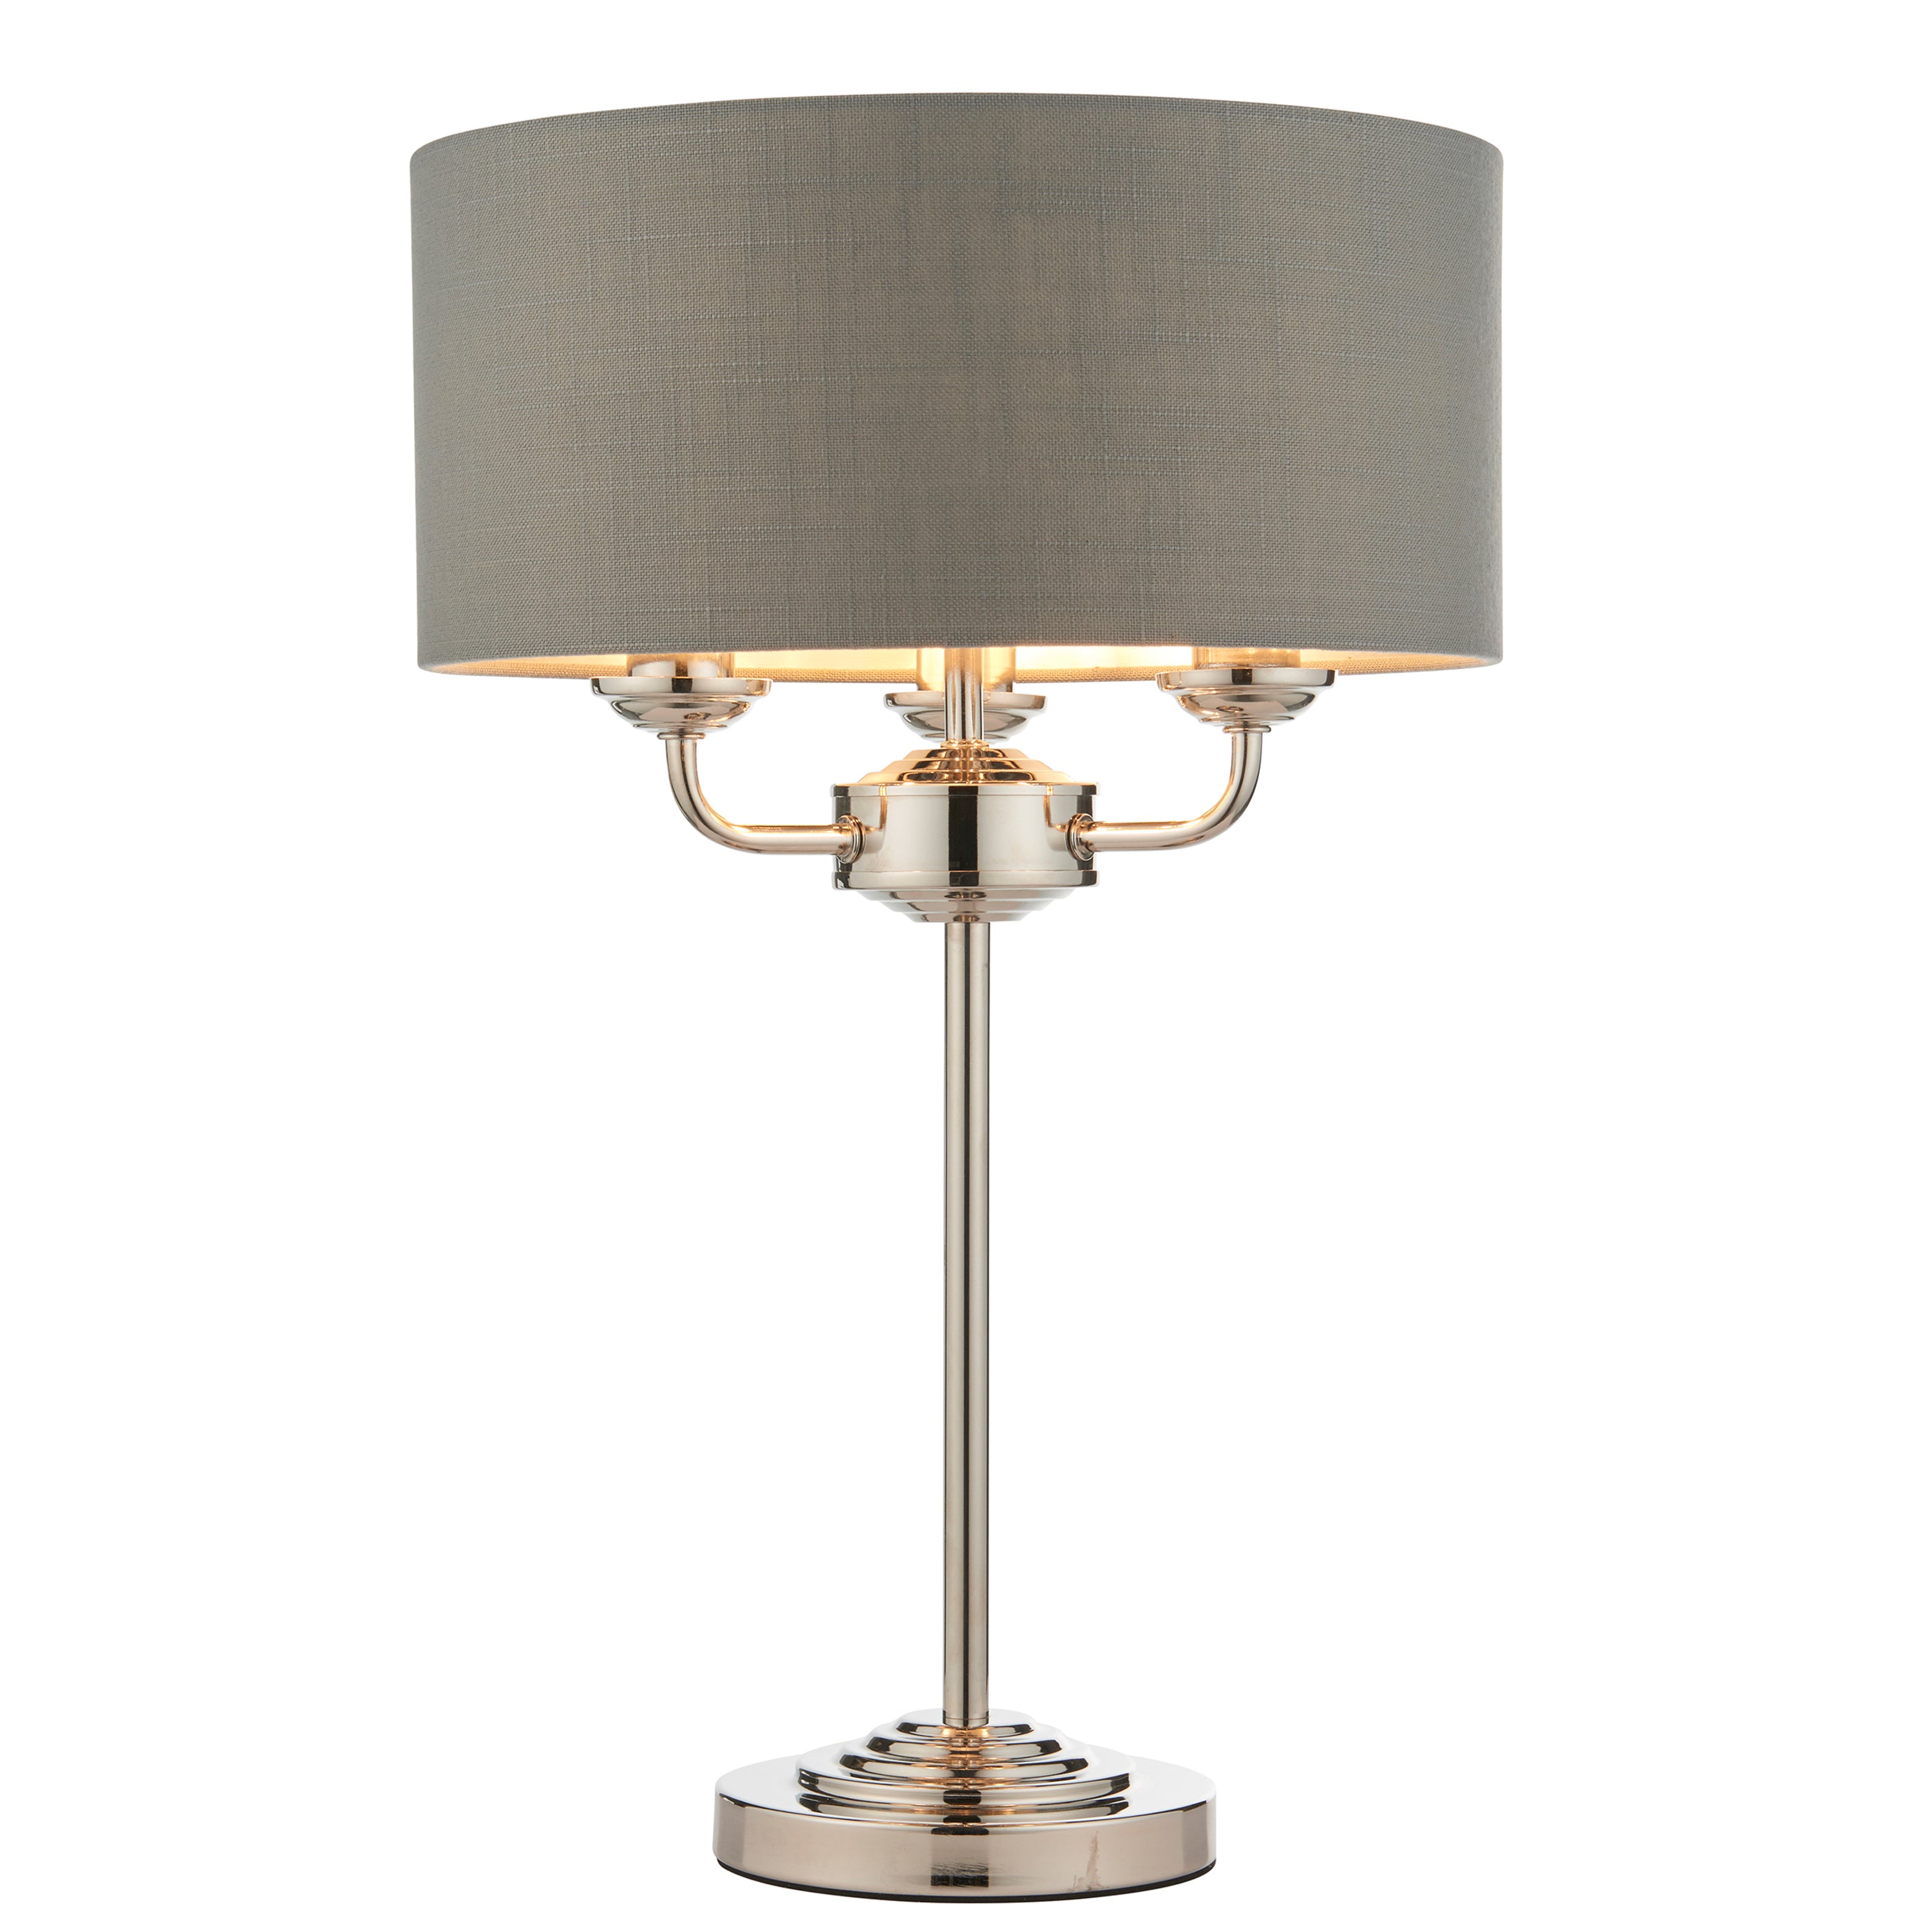 Monclere 3 Light Table Lamp Bright Nickel